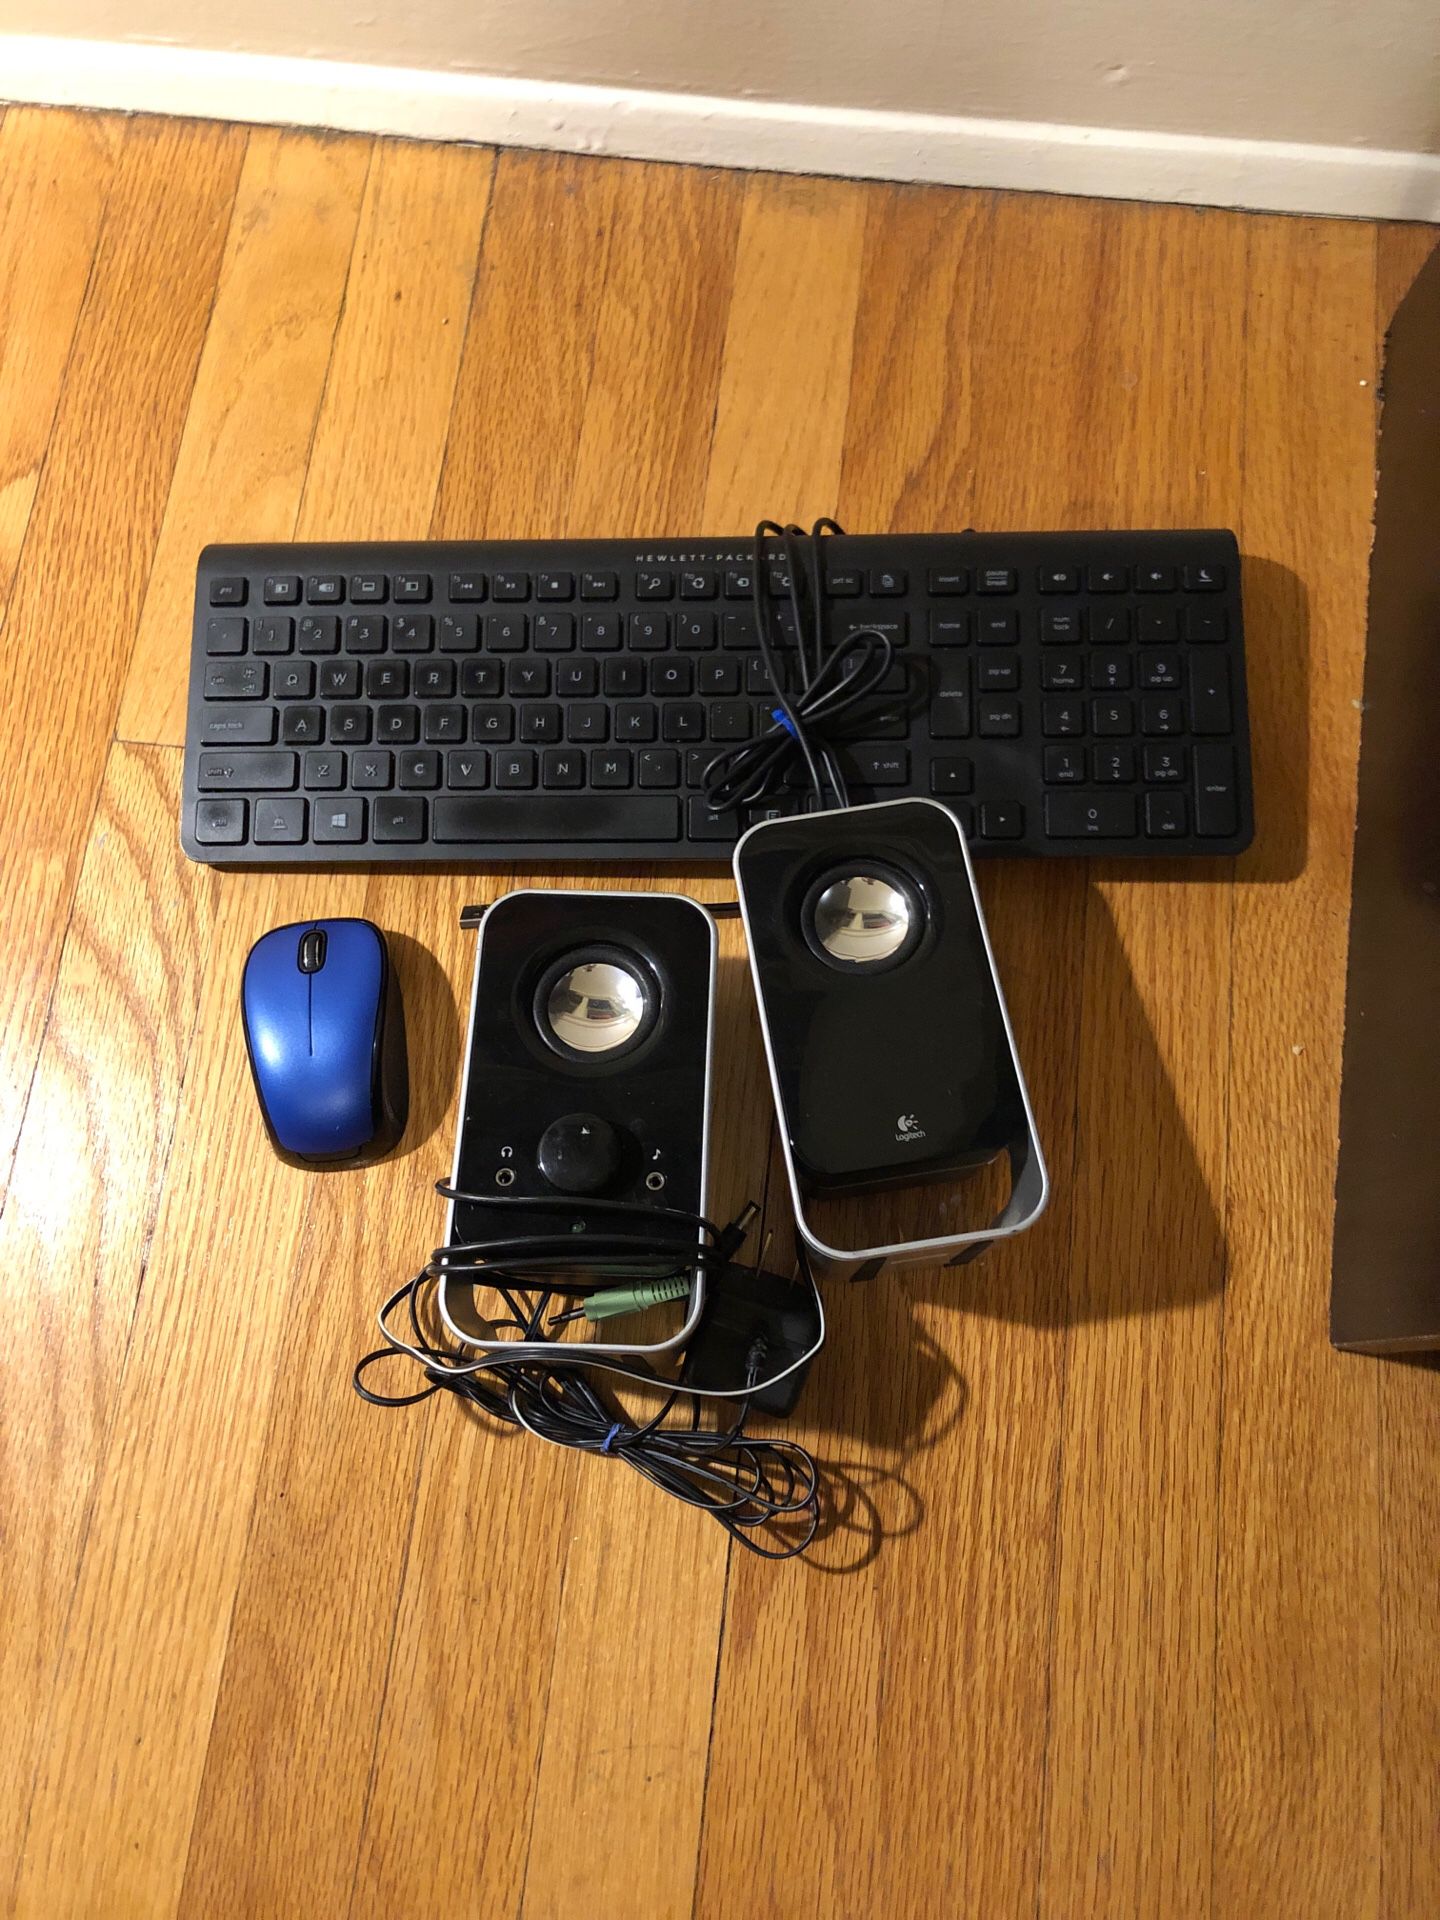 Keyboard, speakers, and wireless mouse bundle